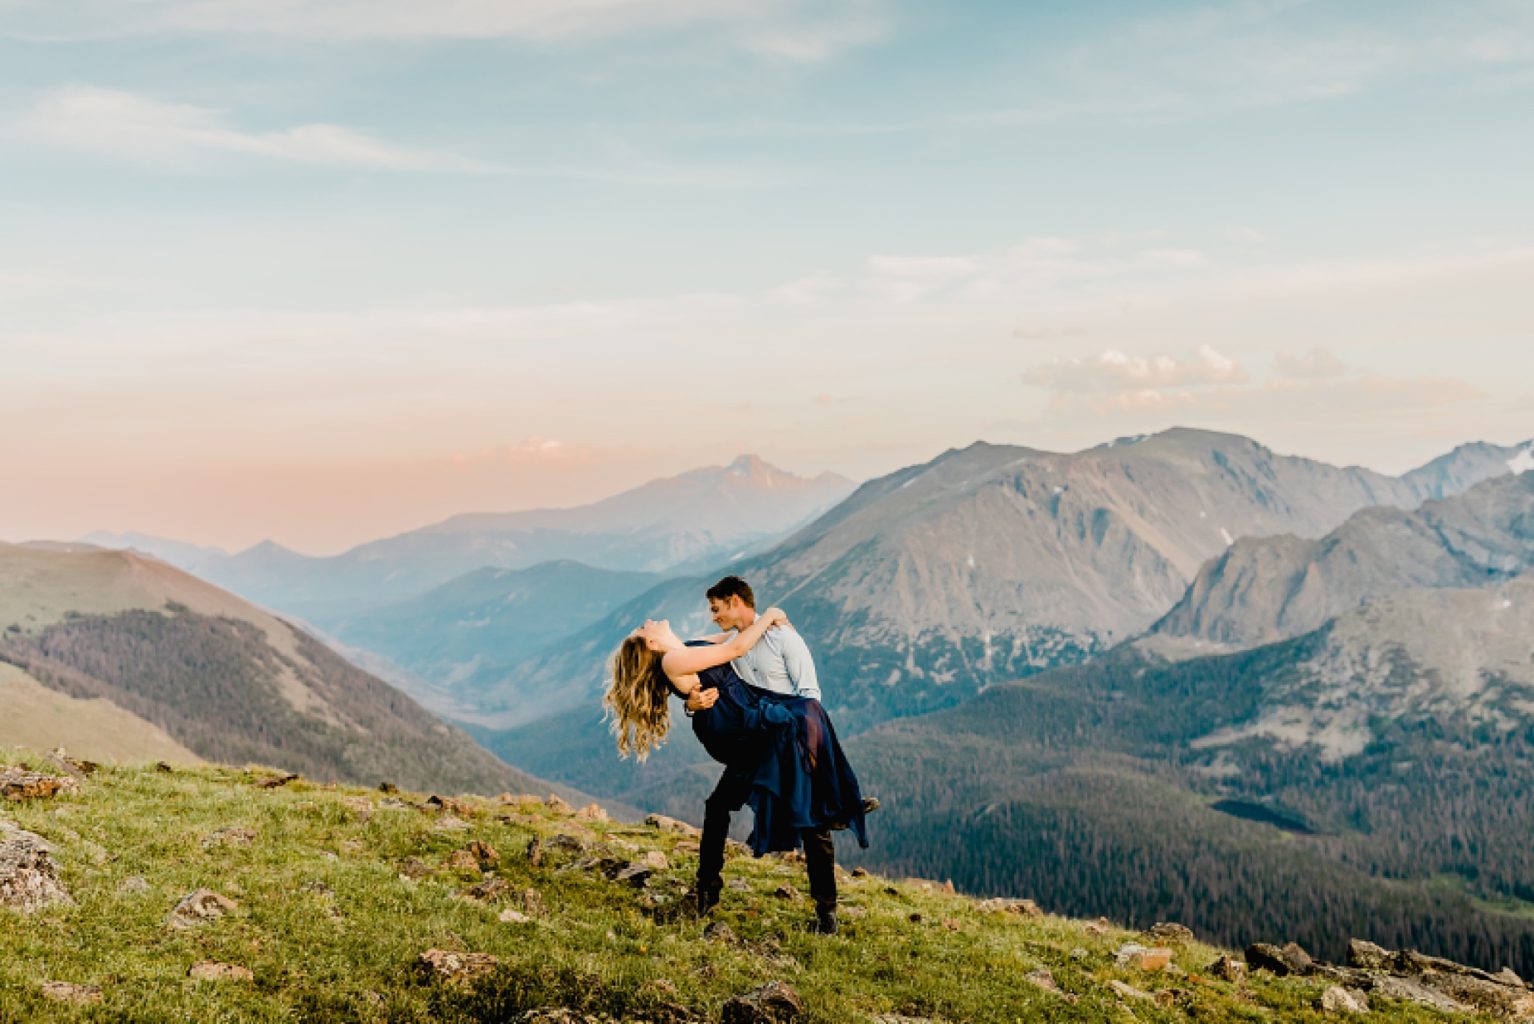 man lifts and dips woman for a kiss on the neck with gorgeous pink sunset and mountain scenery in the backdrop